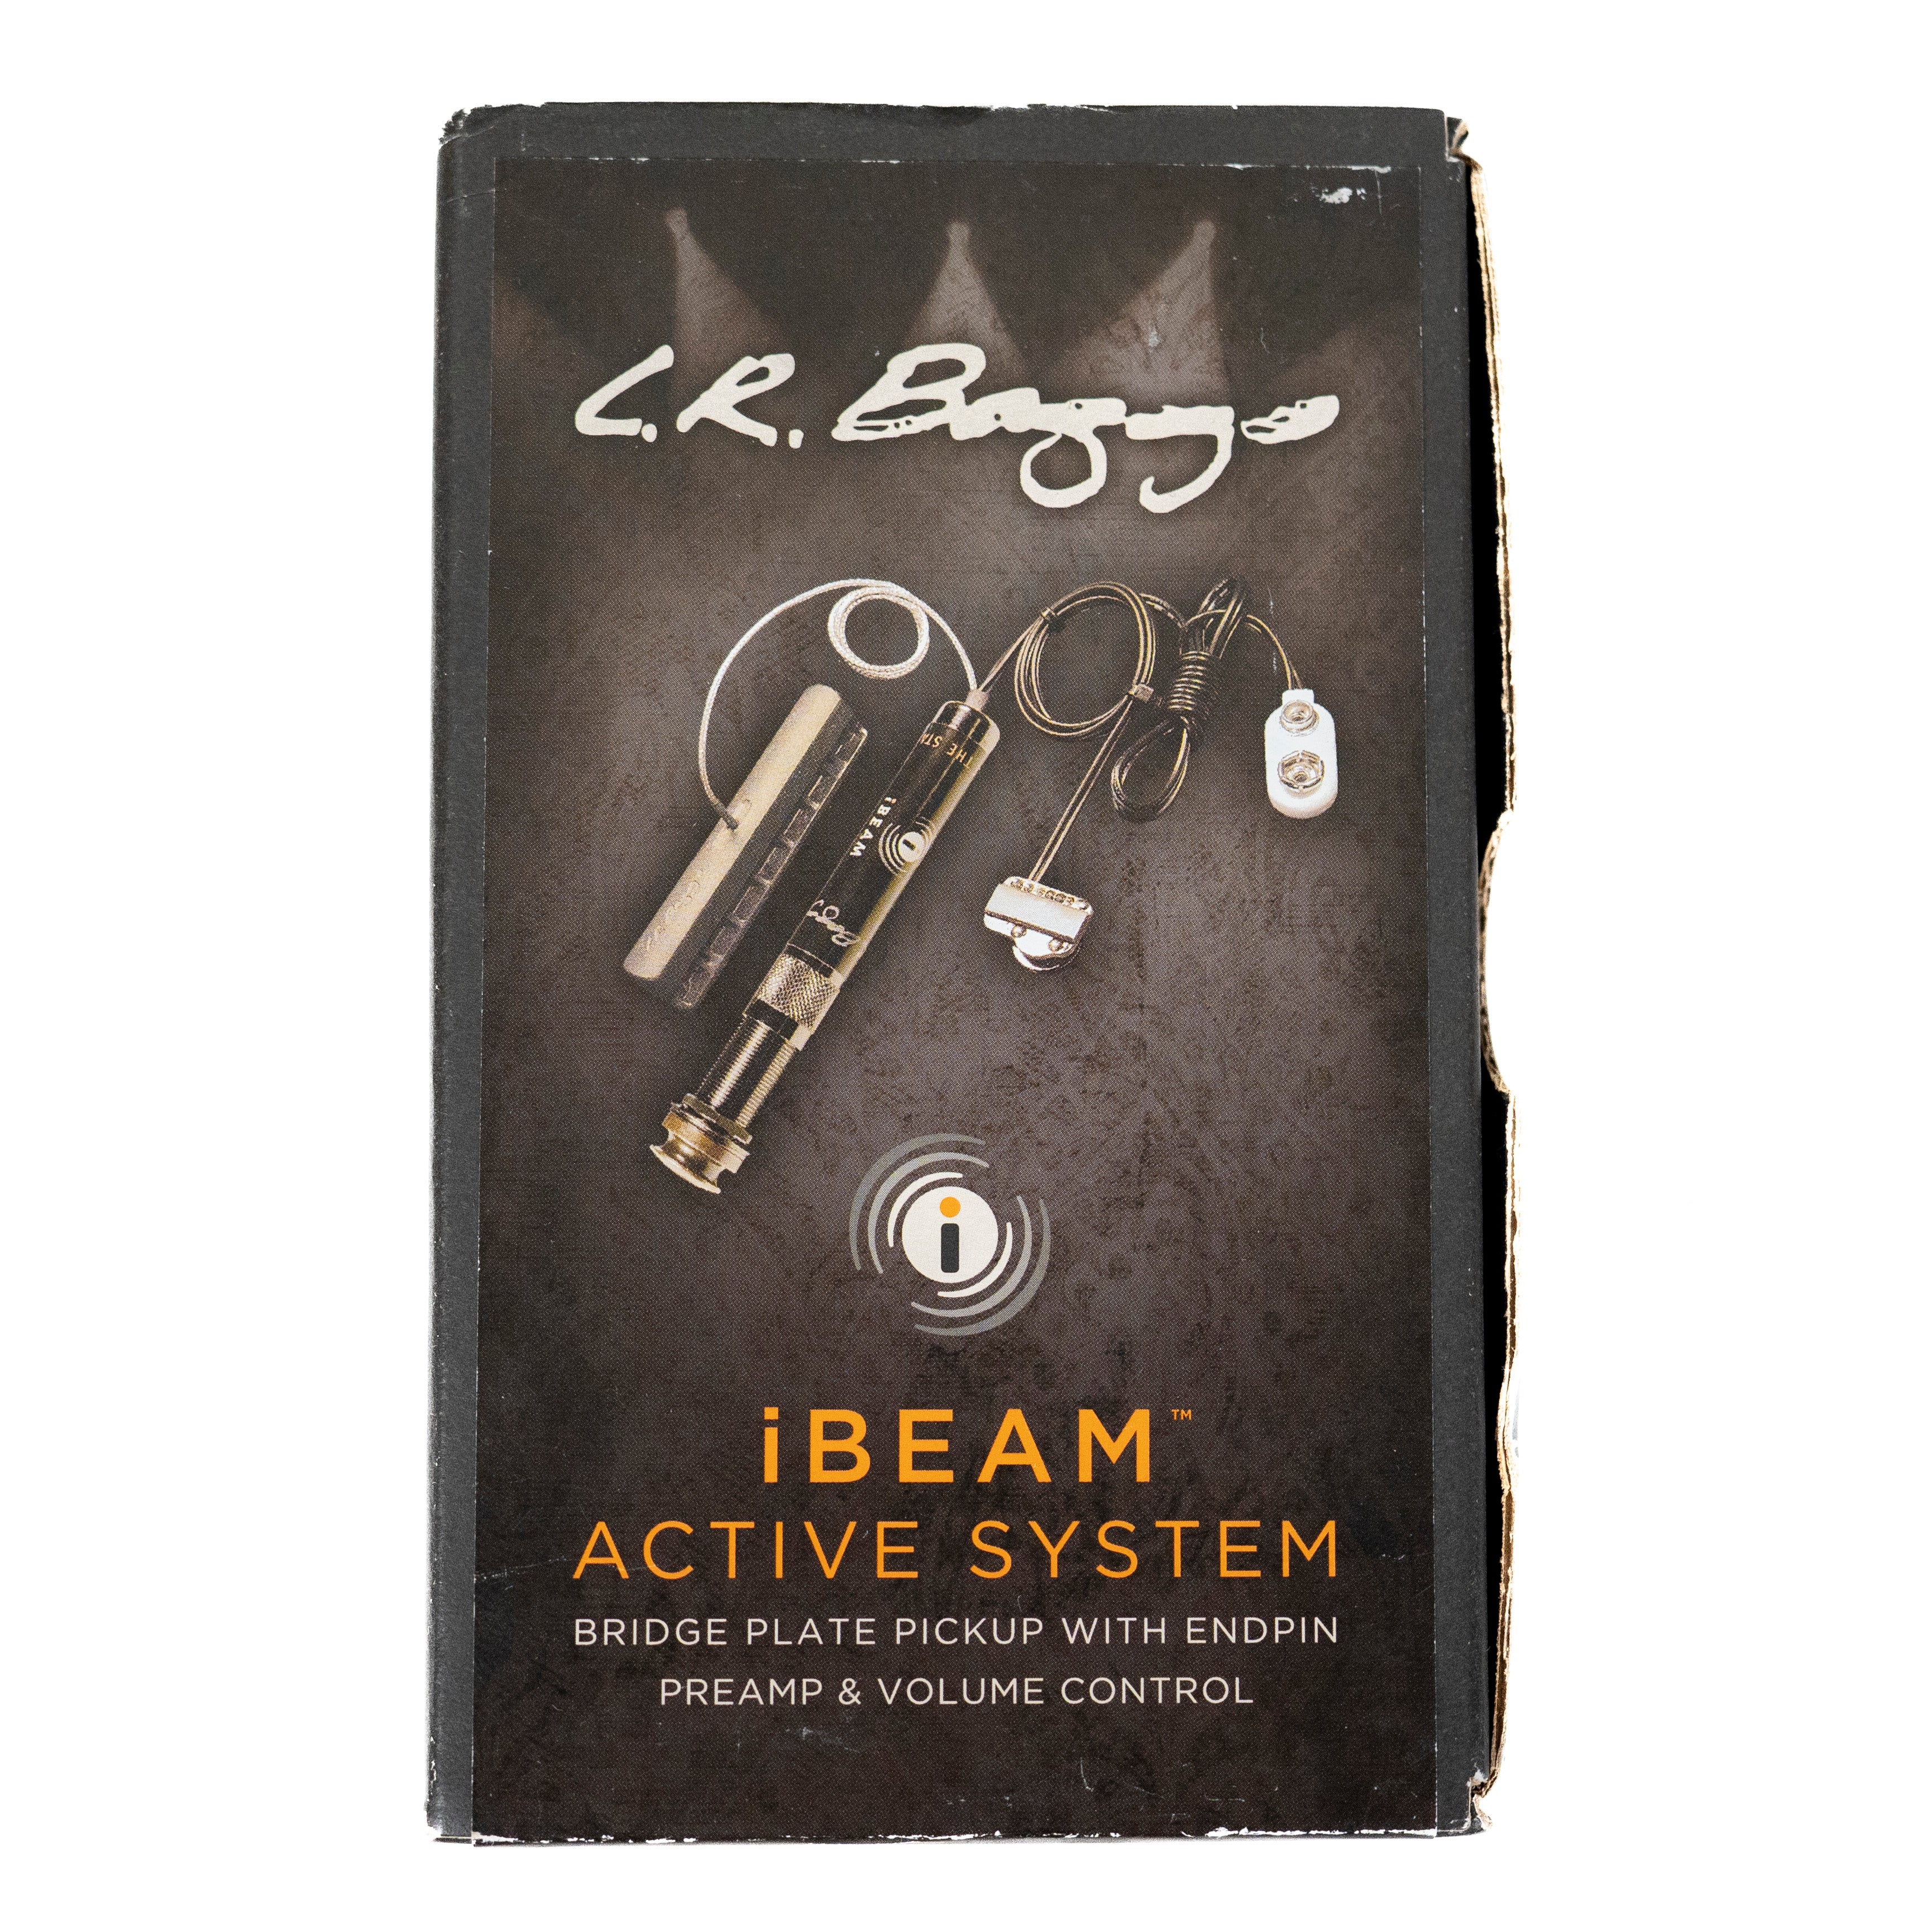 LR Baggs iBeam active system